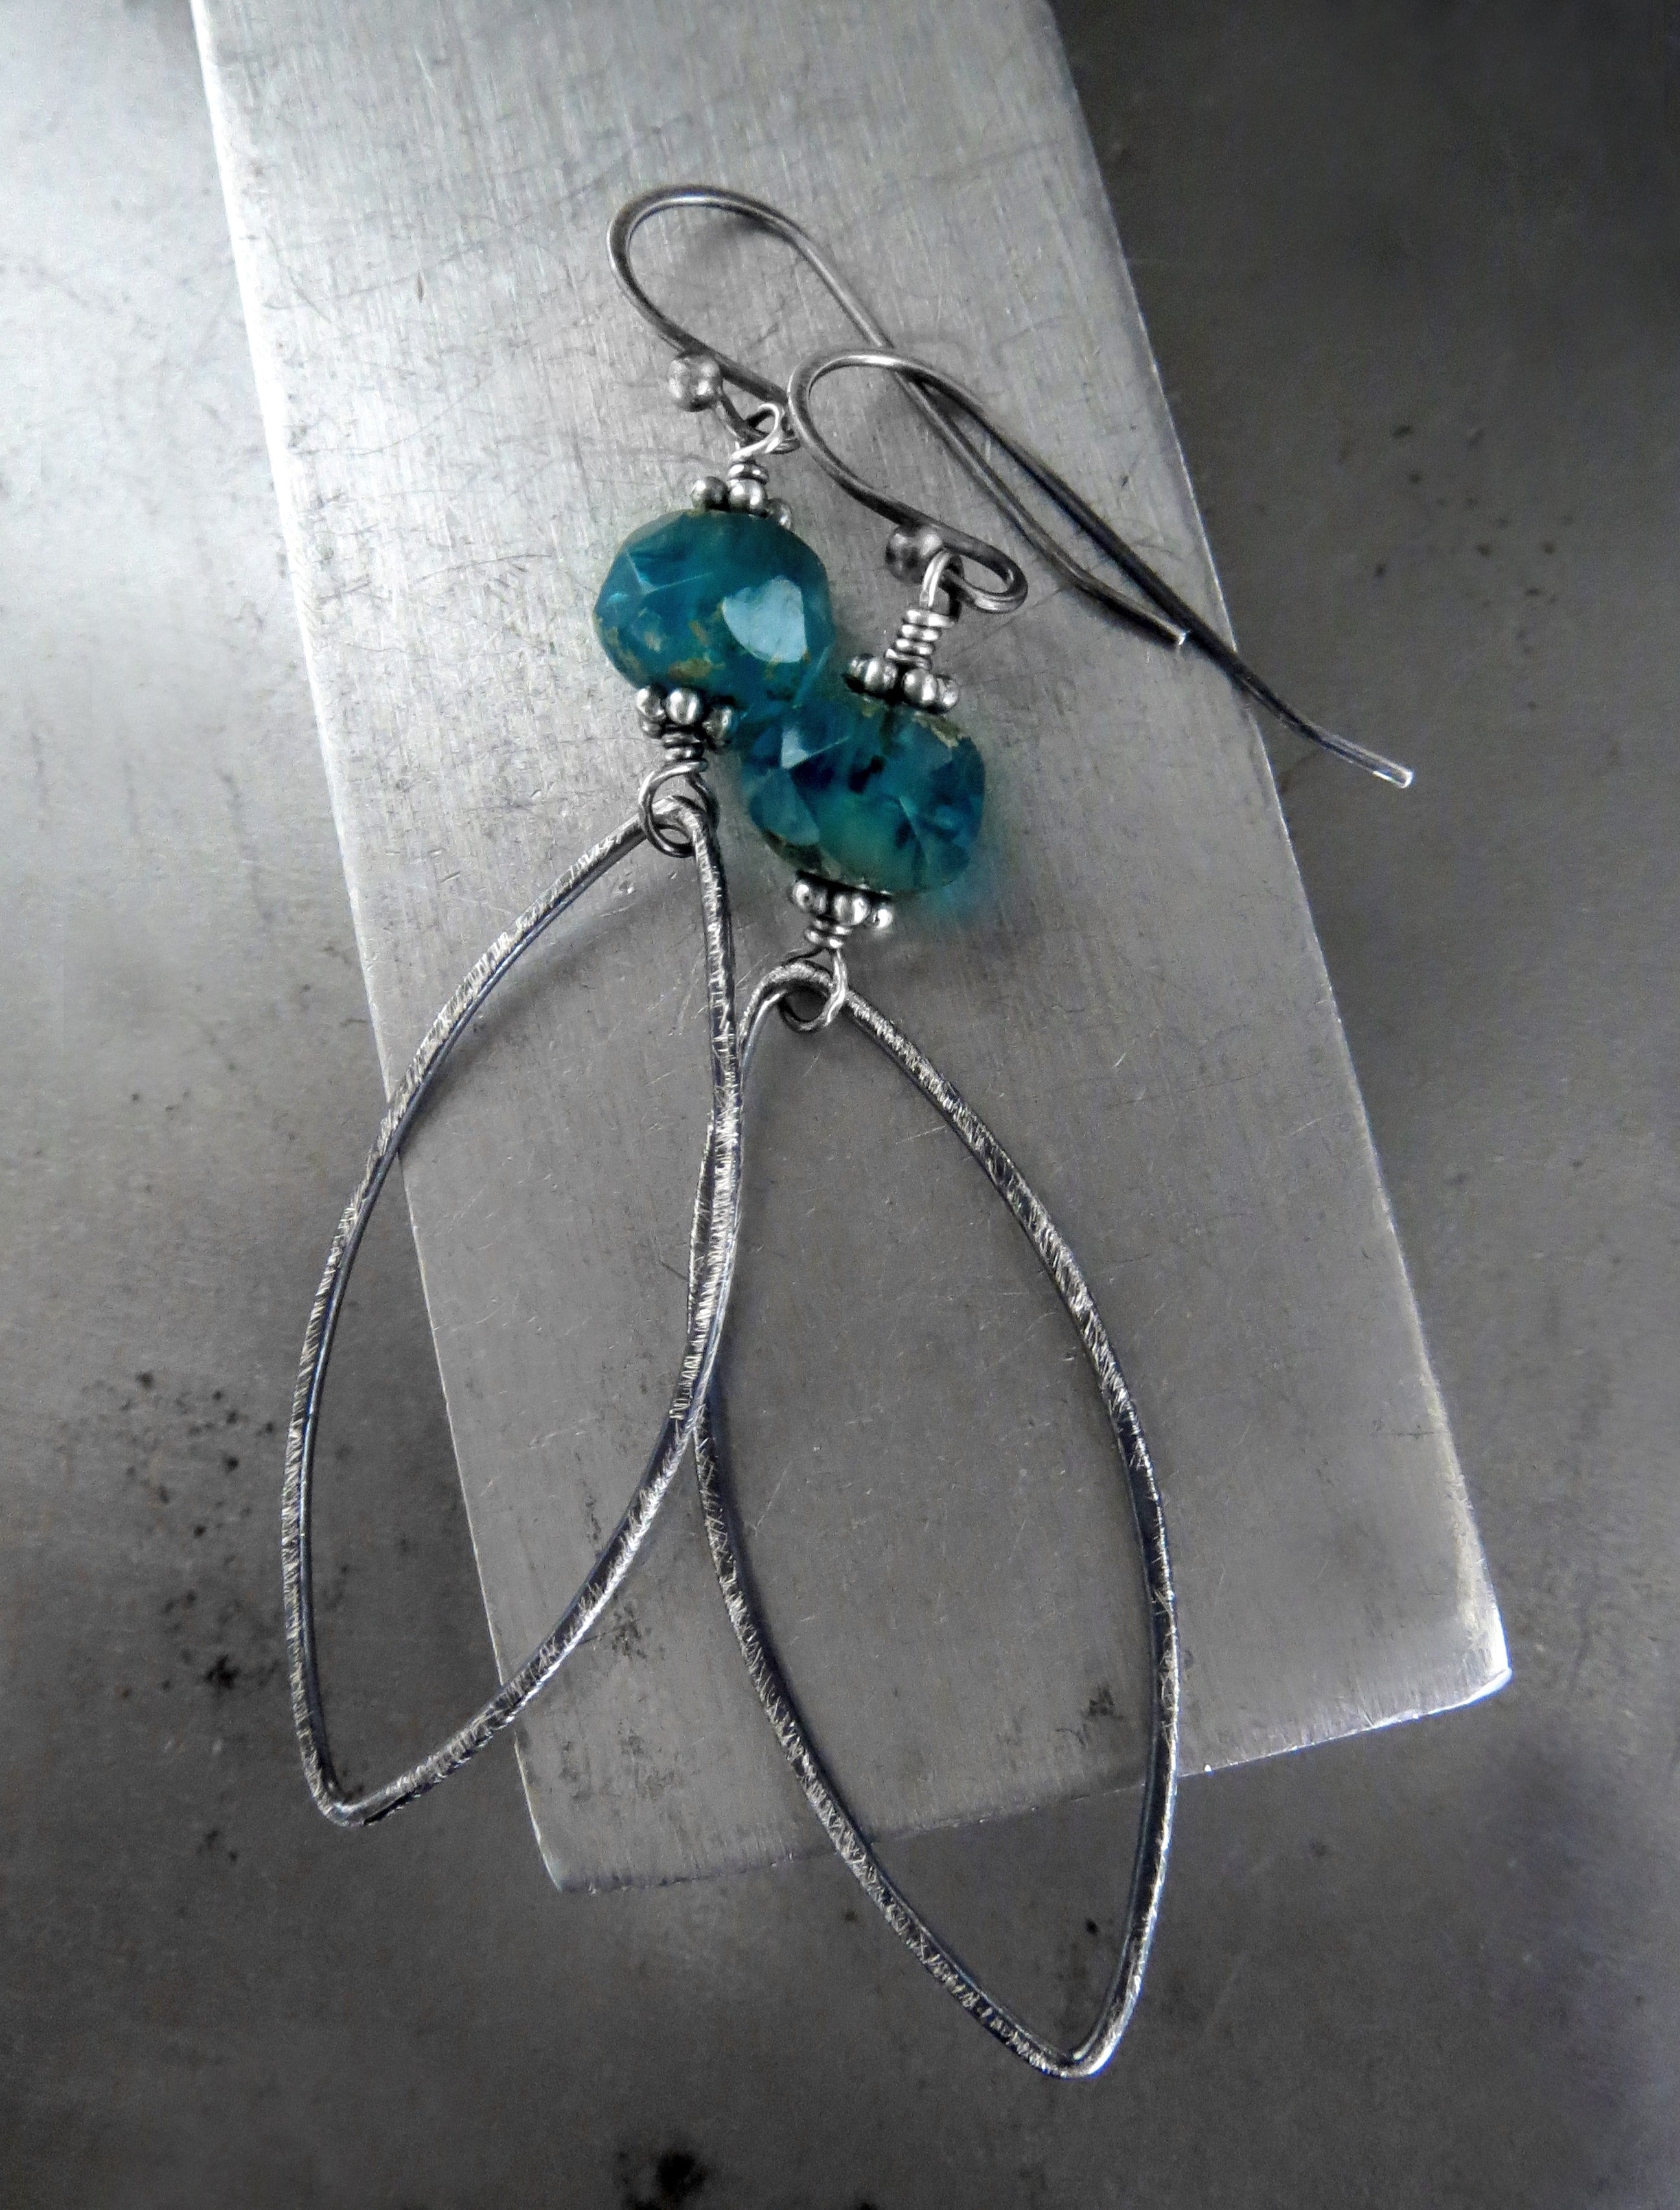 Earthy Aqua Blue Glass Earrings with Hammered Oxidized Sterling Silver Leaves